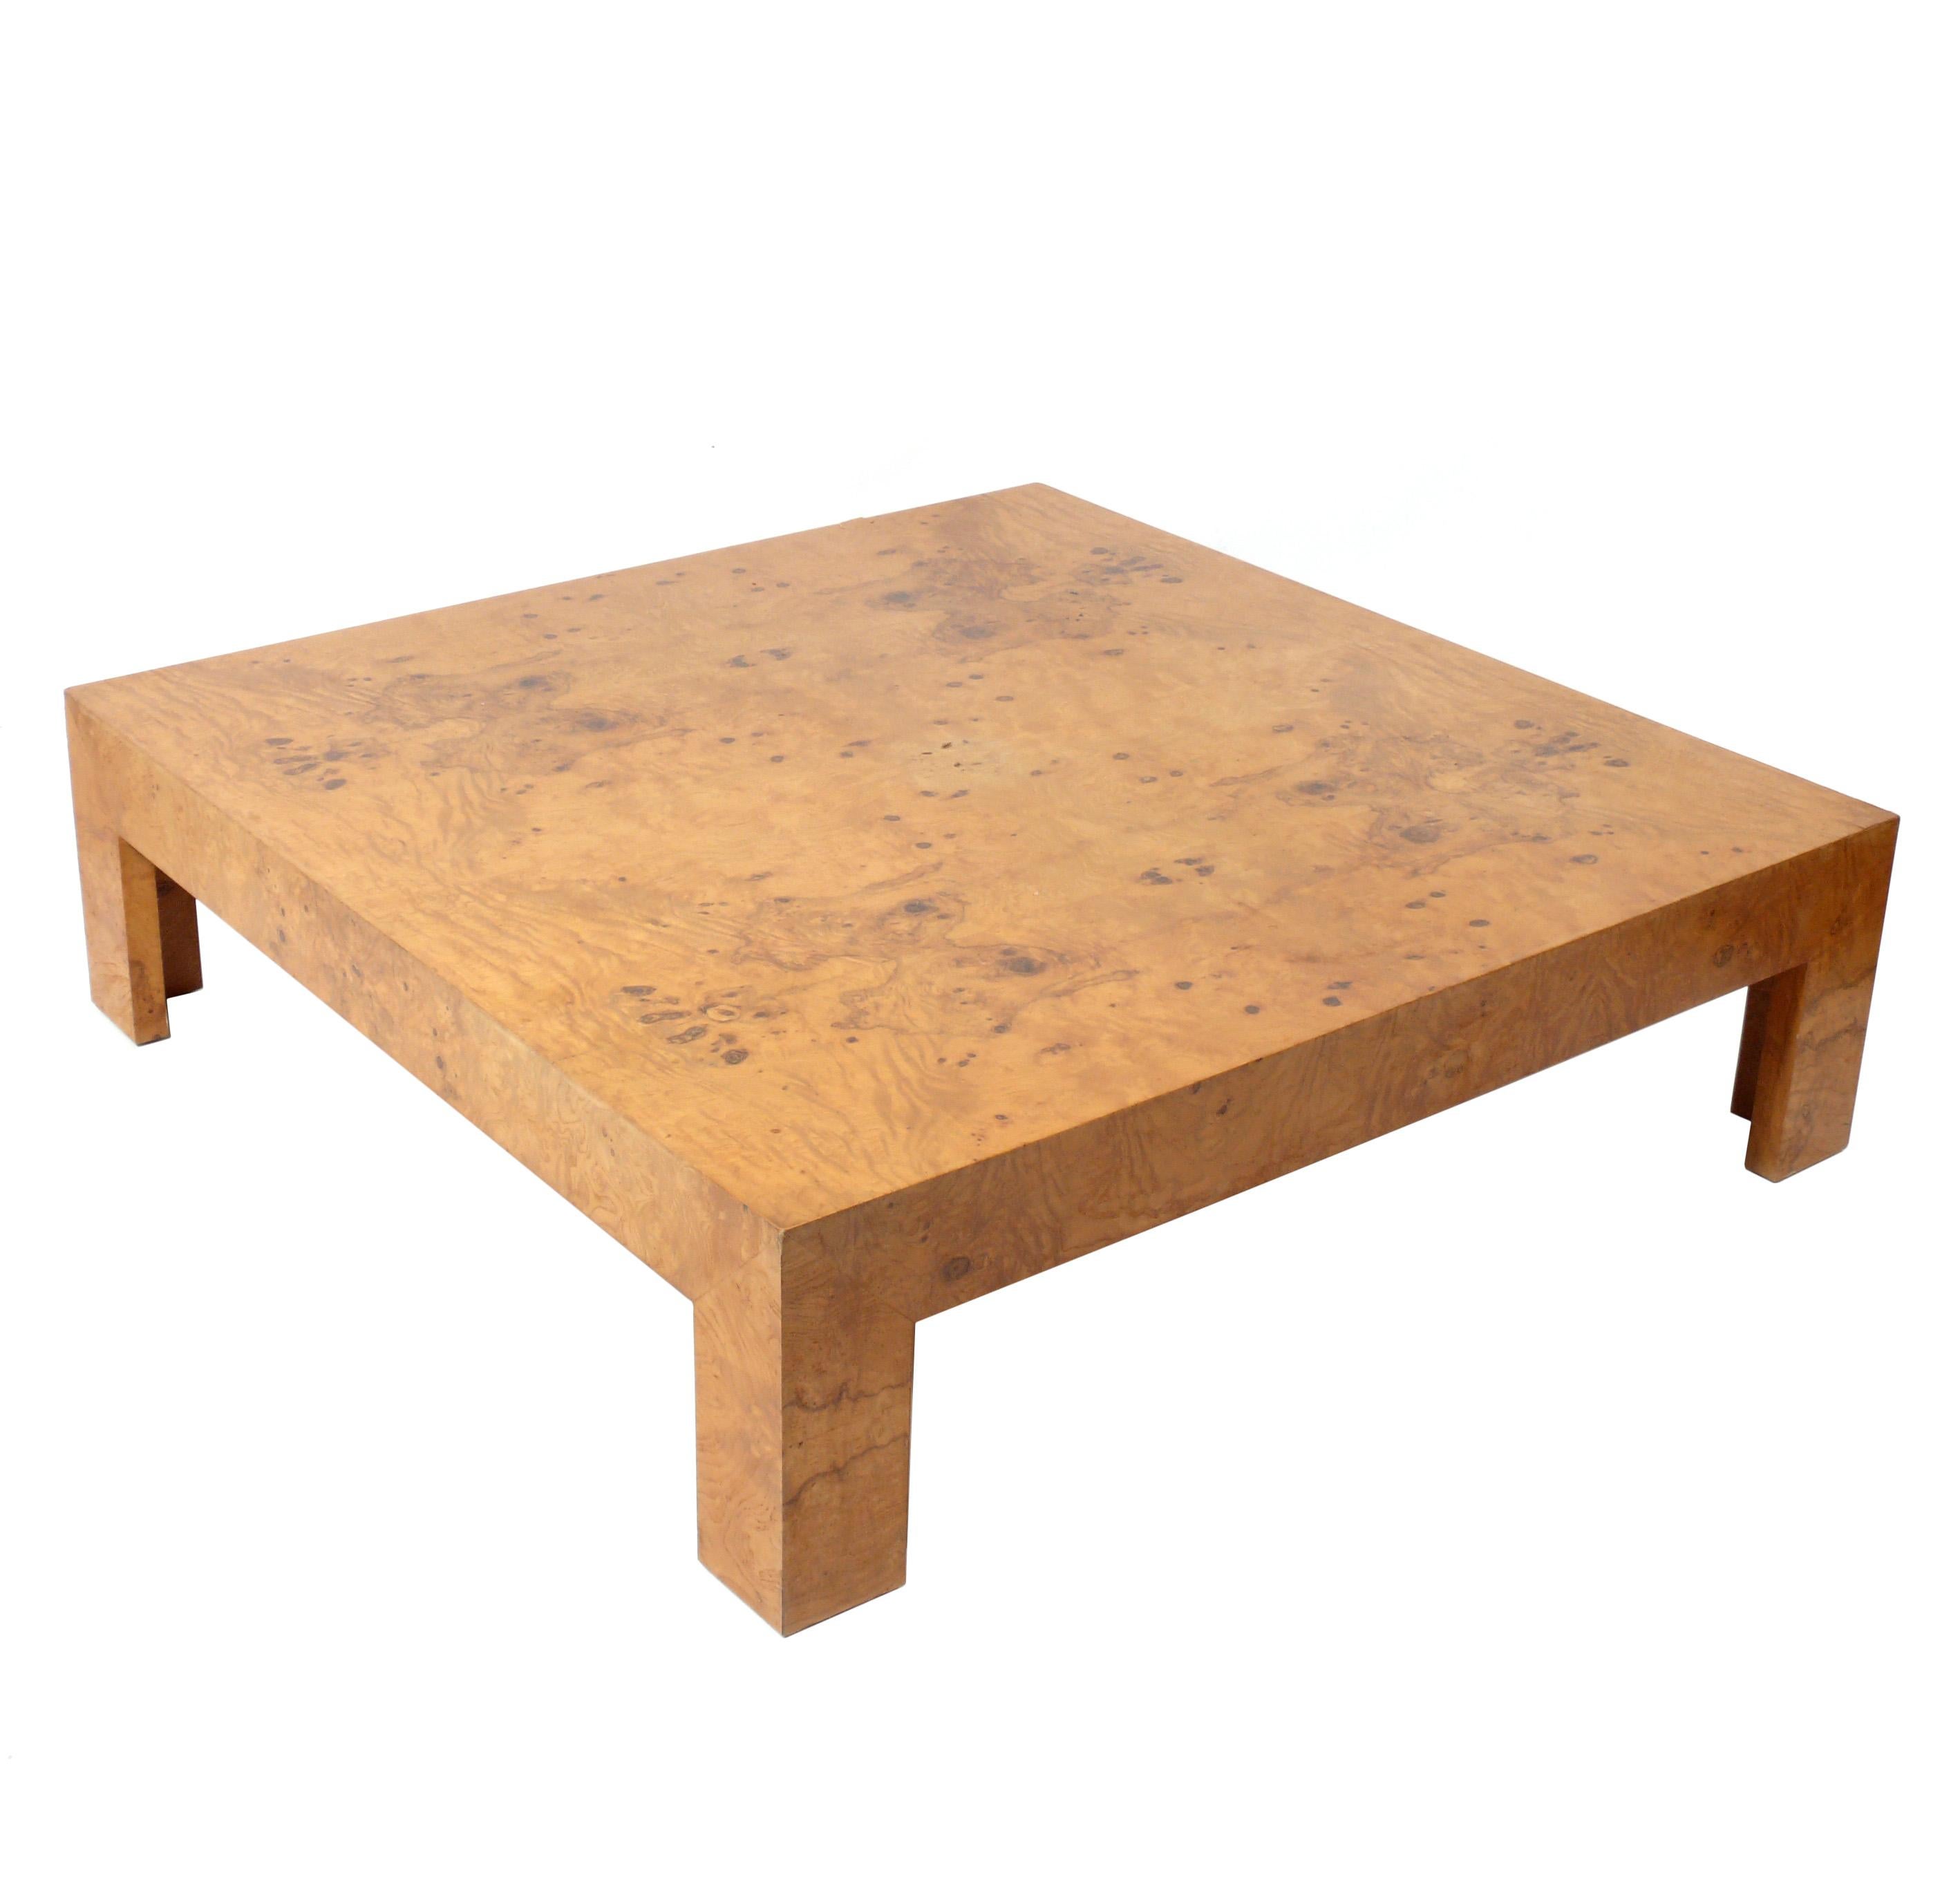 Large scale burl wood coffee table, designed by Milo Baughman for Thayer Coggin, American, circa 1960s. This large-scale table was made for entertaining and the burled wood graining is beautiful. It measures an impressive 54